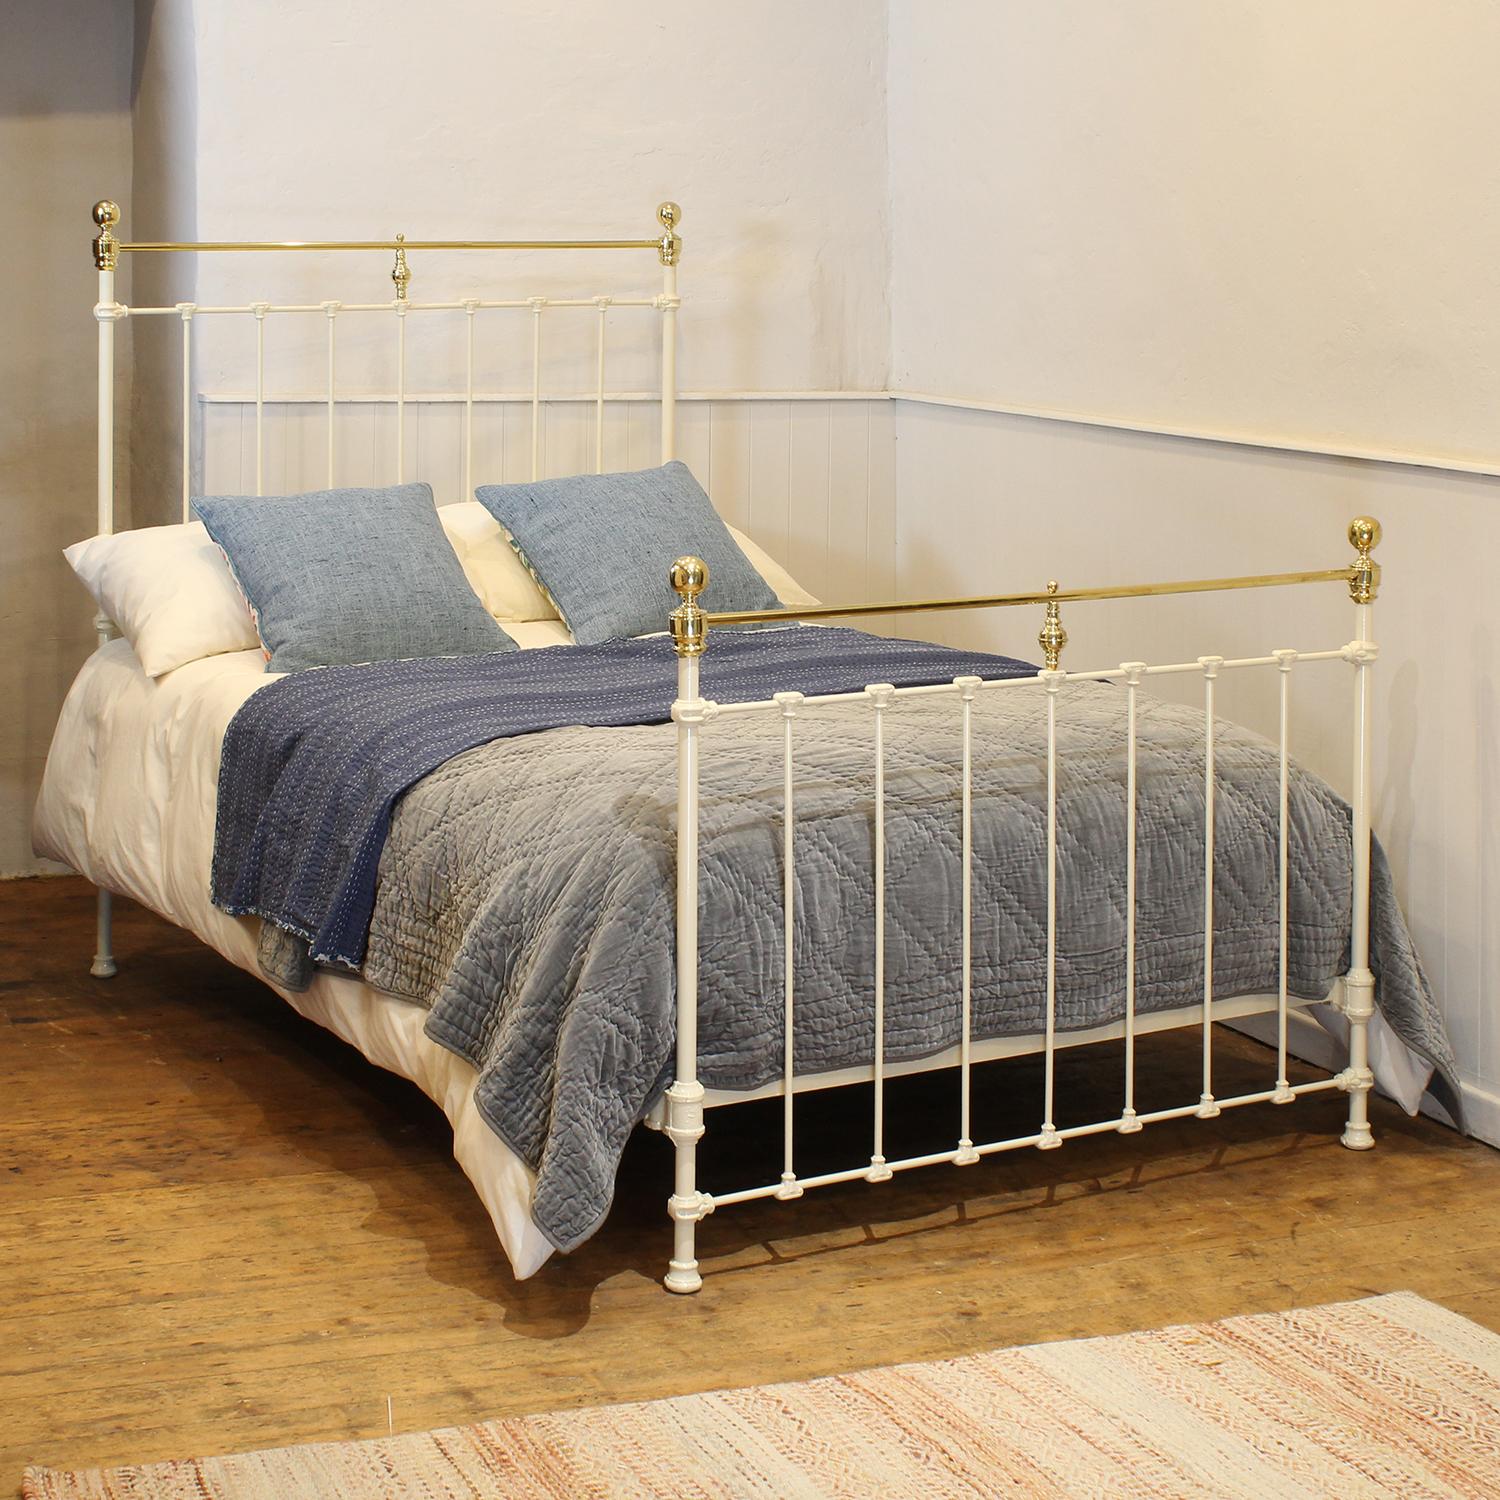 Victorian brass and cast iron bedstead finished in cream with straight brass top rails and decorative castings.

This bed accepts a double size 4ft wide (48 inch or 120cm) base and mattress. 

The price includes a firm standard bed base to